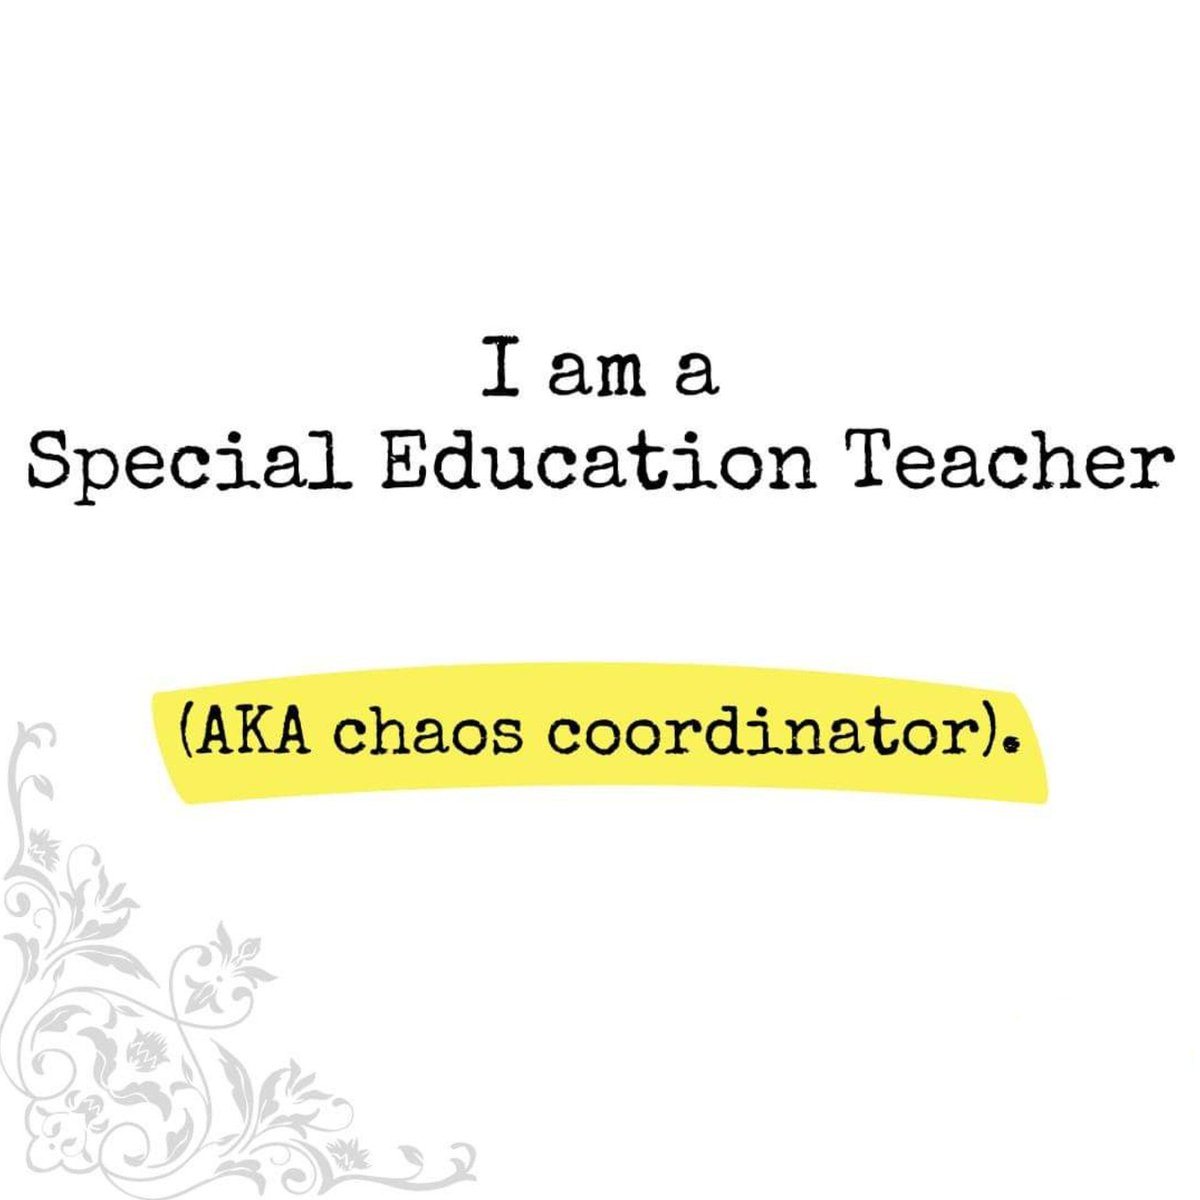 I'm a special education teacher (aka chaos coordinator). Learning should be fun, no matter what!

#specialeducation #teacherlife #inclusion #learningisfun